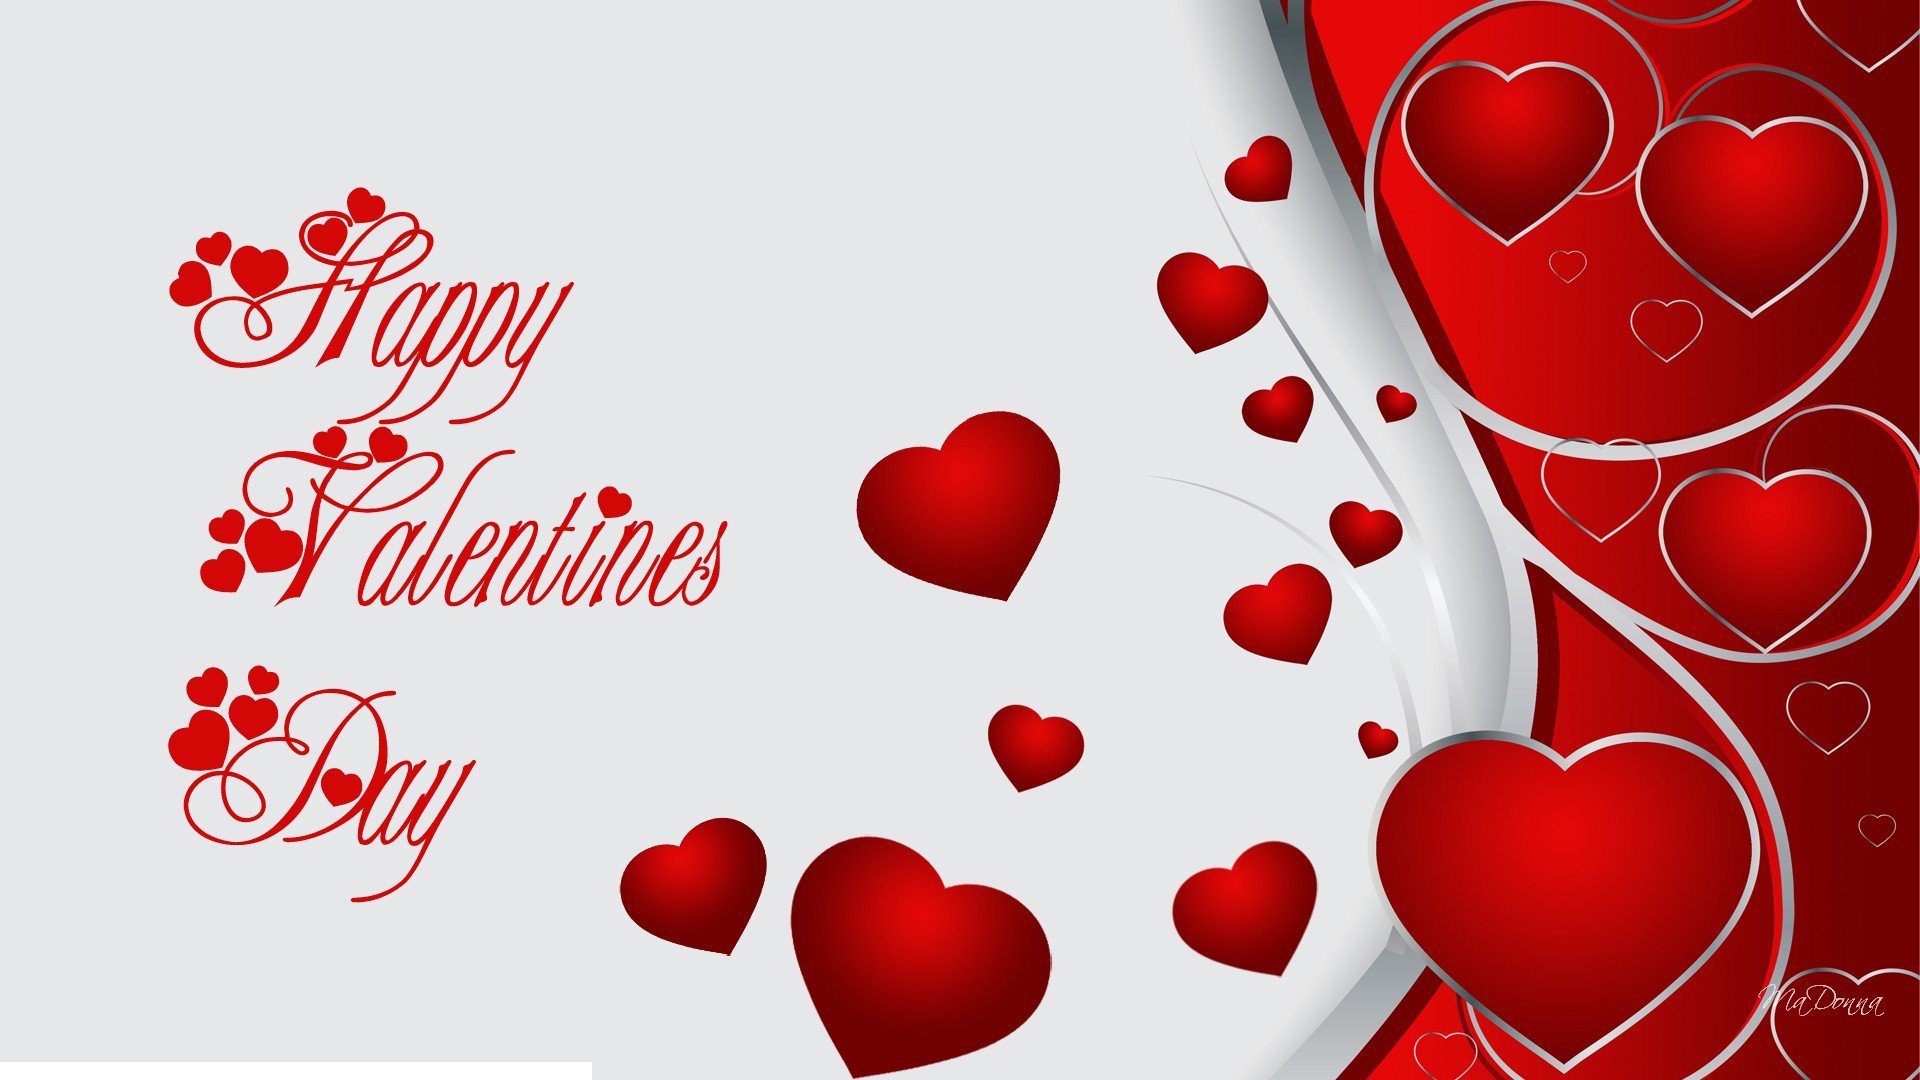 Happy Valentines Day Wallpaper [10 Best] Valentine S Day Pc Wallpapers to Make the Mood